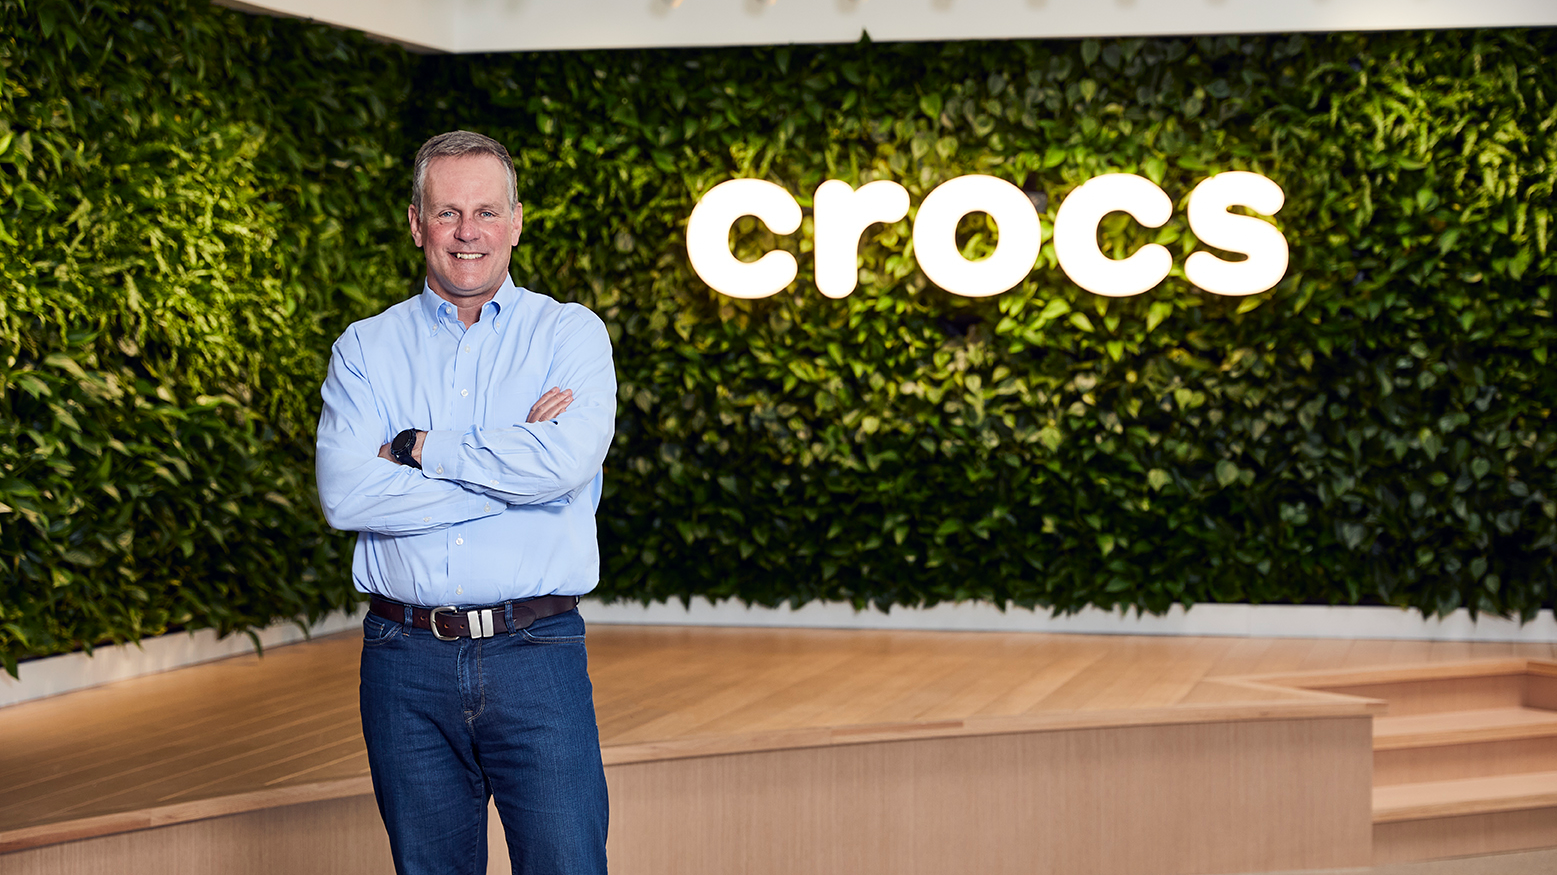 Love Crocs? Hate Crocs? Either's OK with the company's CEO. - Marketplace